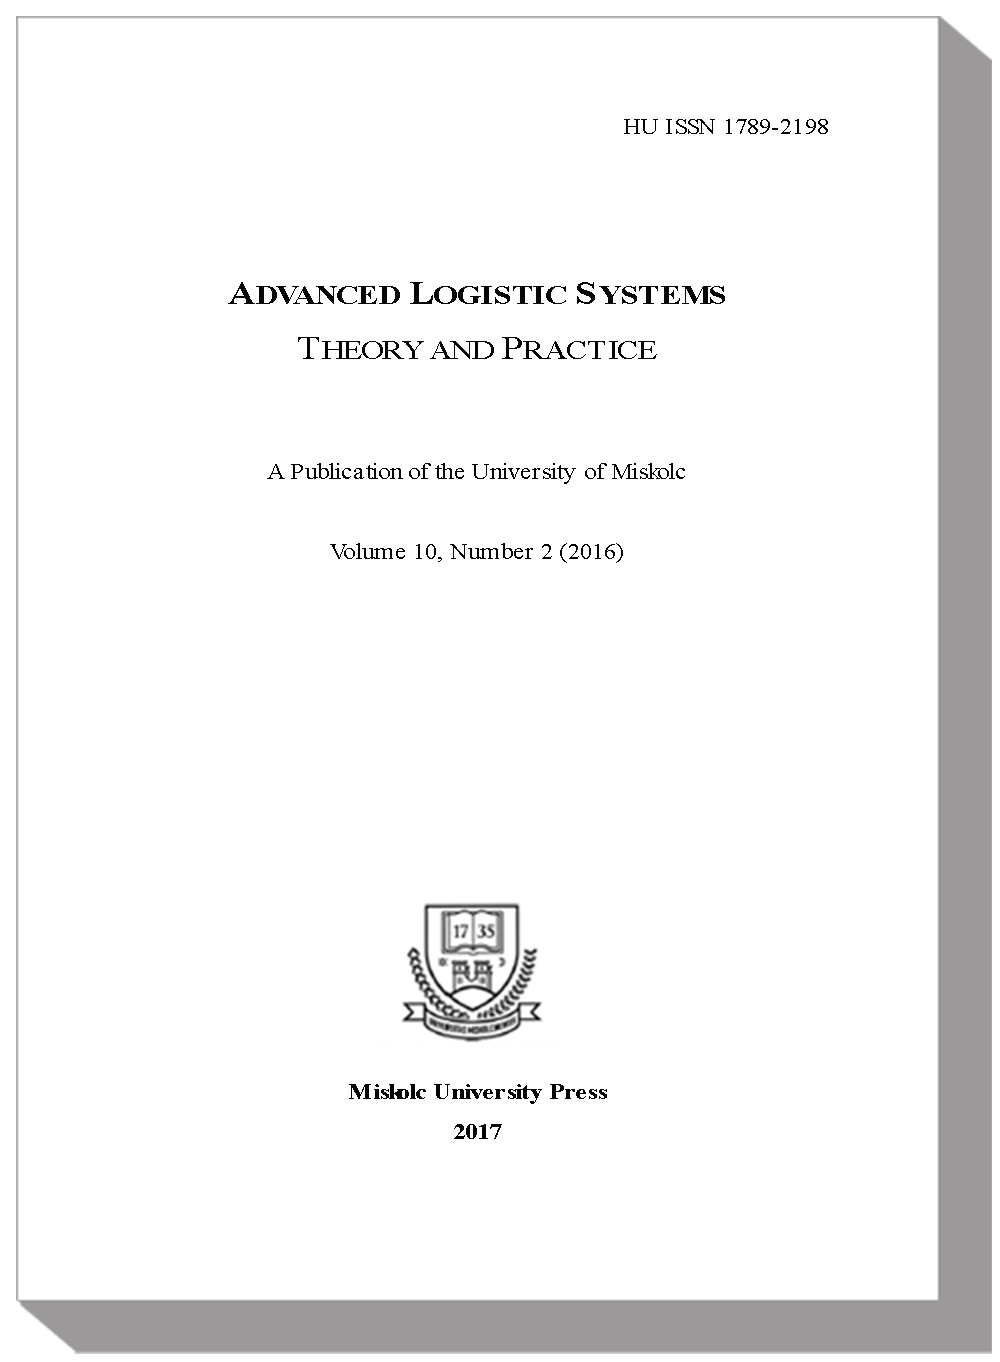 					View Vol. 10 No. 2 (2016): Advanced Logistic Systems - Theory and Practice
				